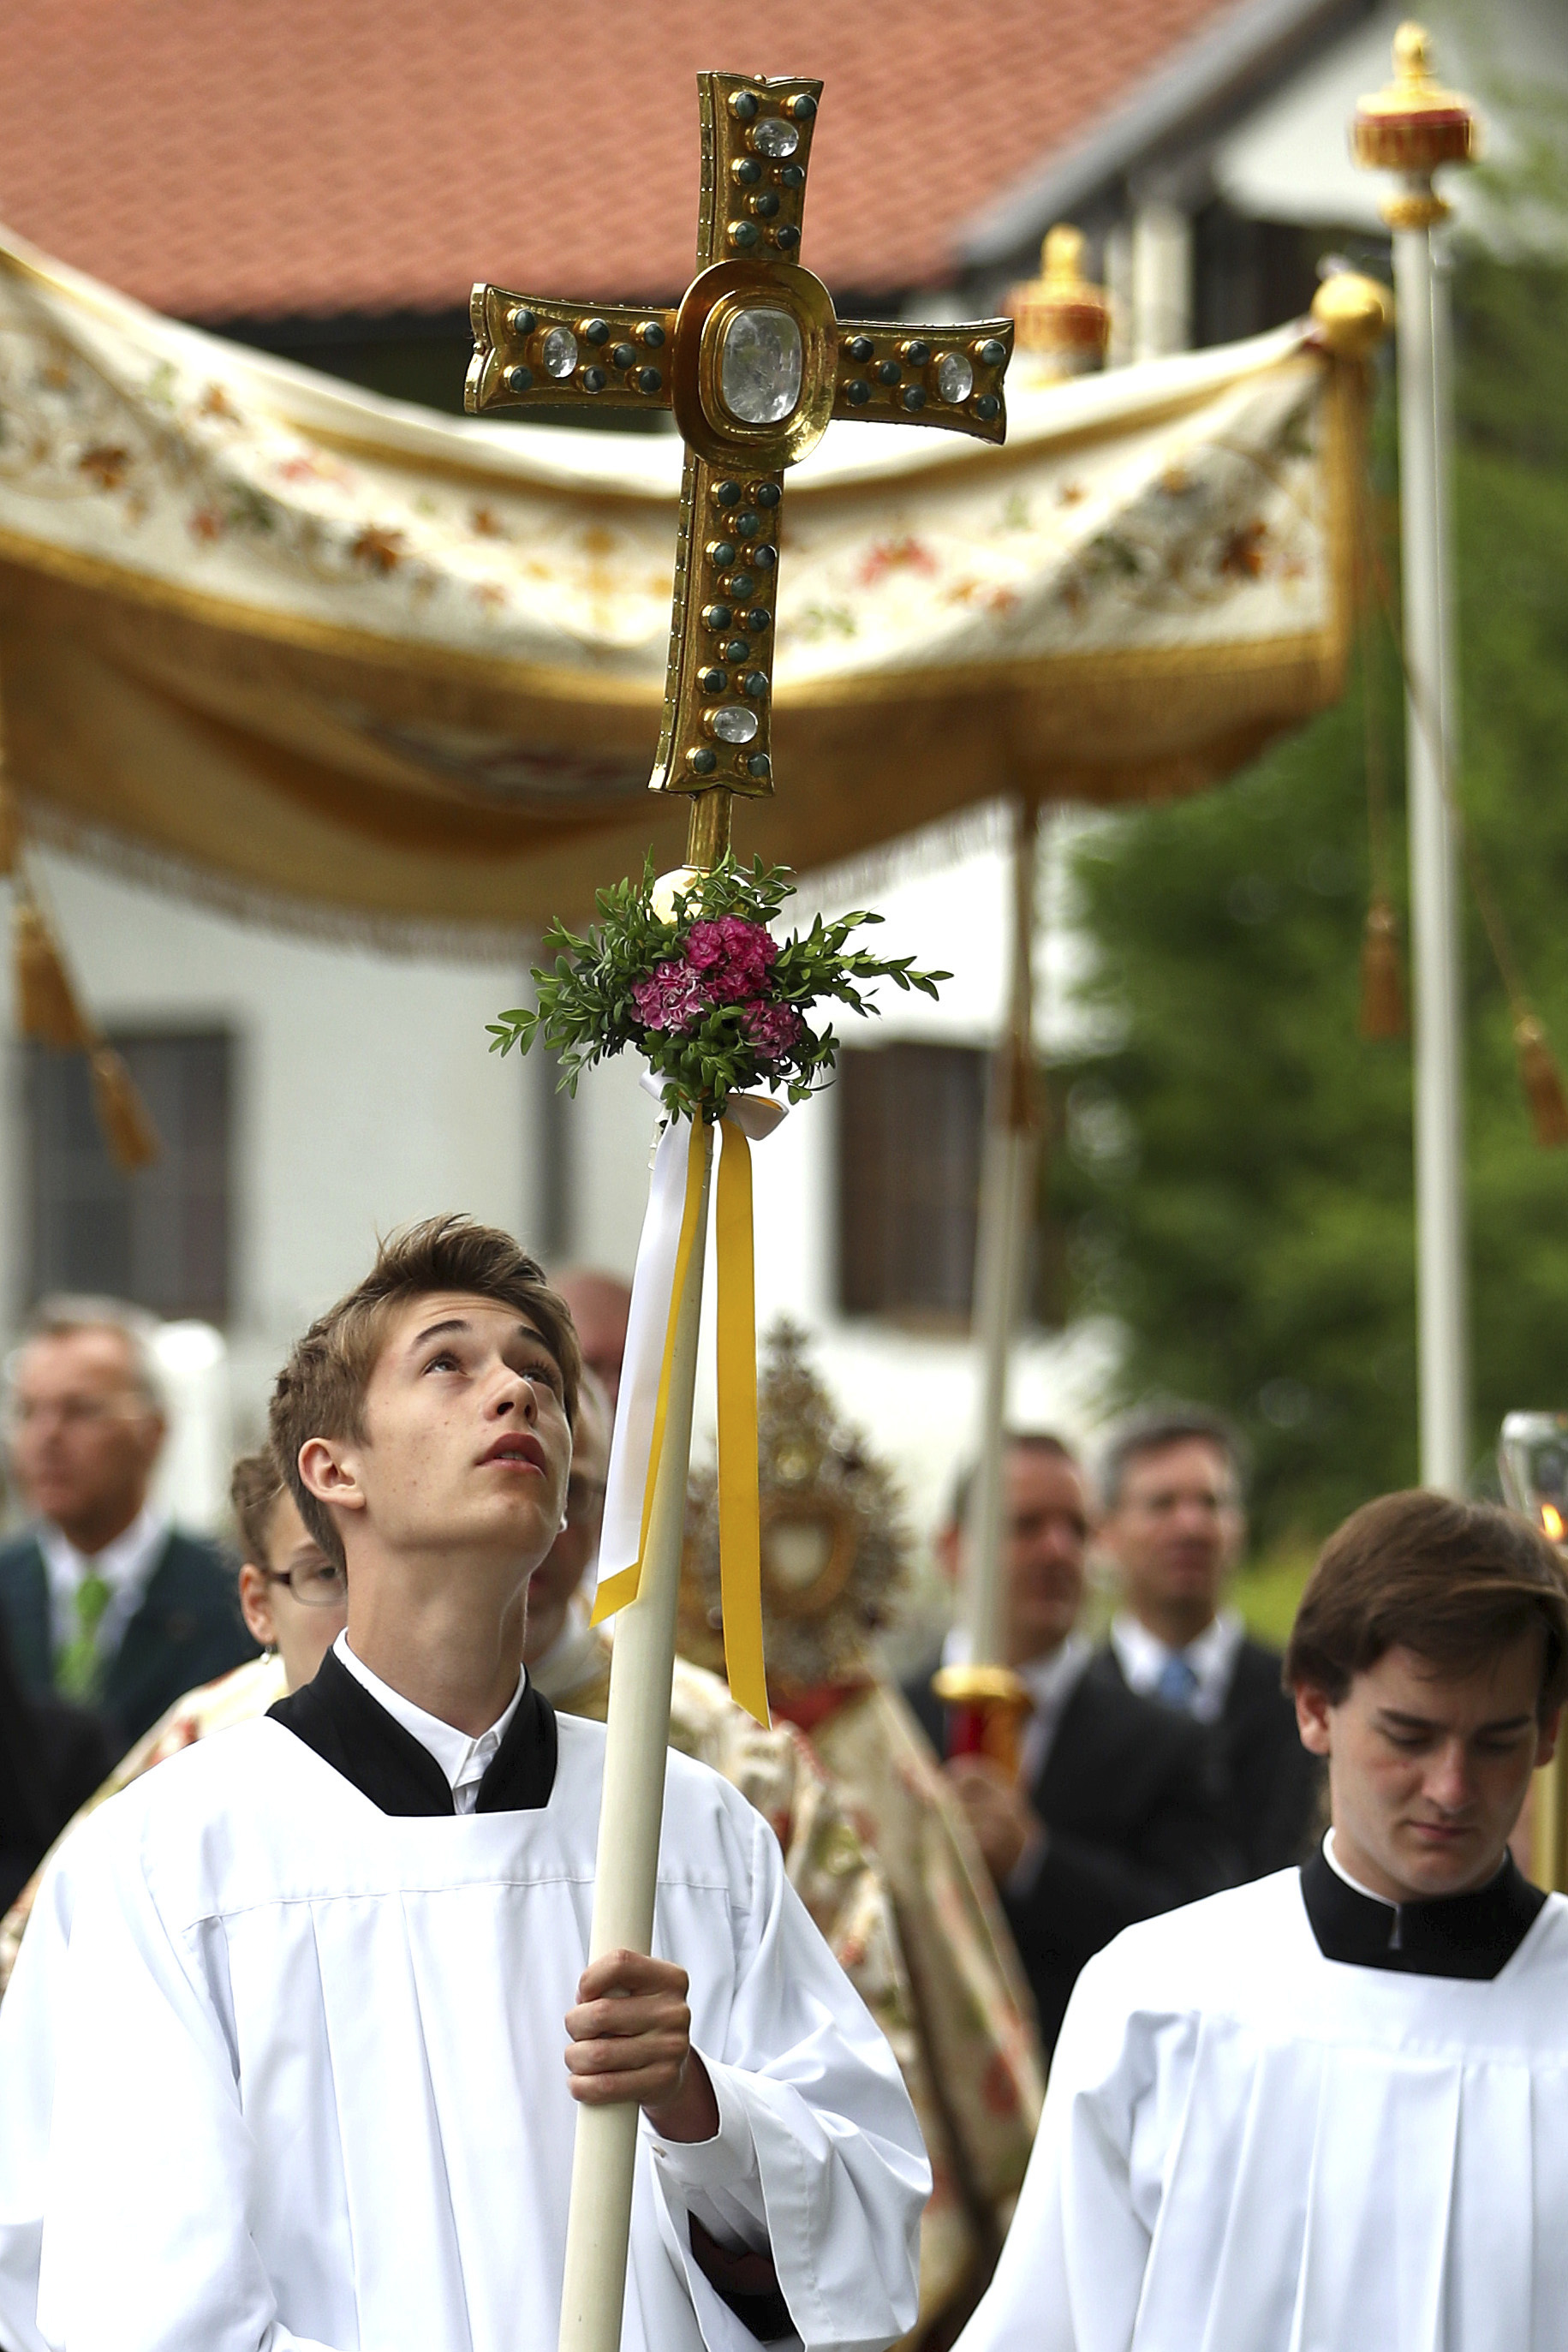 A young man carries a cross during a Corpus Christi procession at lake Staffelsee in Seehausen near Murnau, Germany, Thursday, June 20, 2019. (AP Photo/Matthias Schrader)